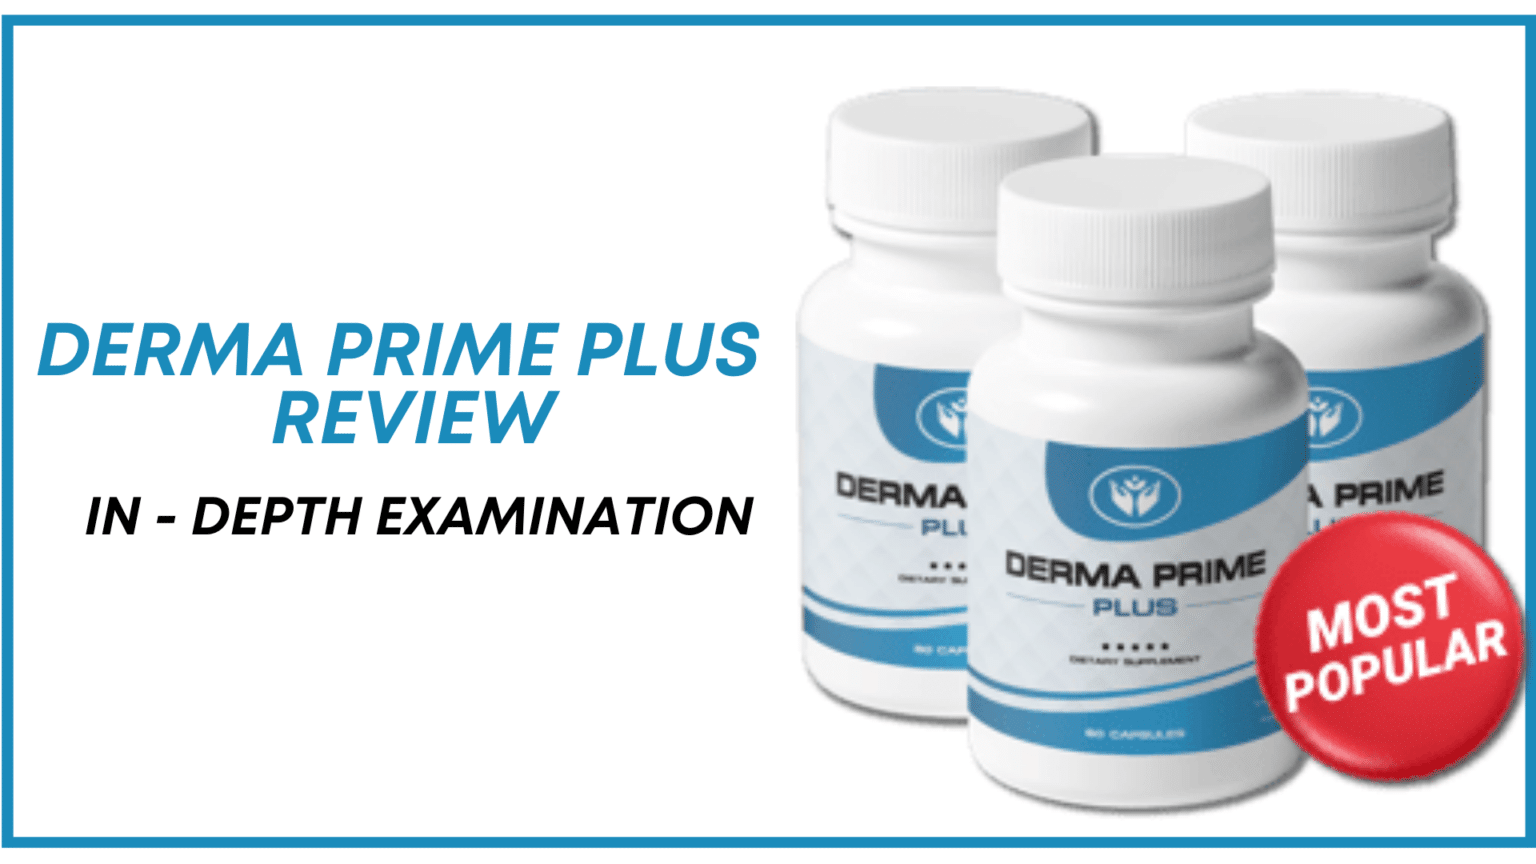 Derma Prime Plus Review - The Complete Truth About Skincare